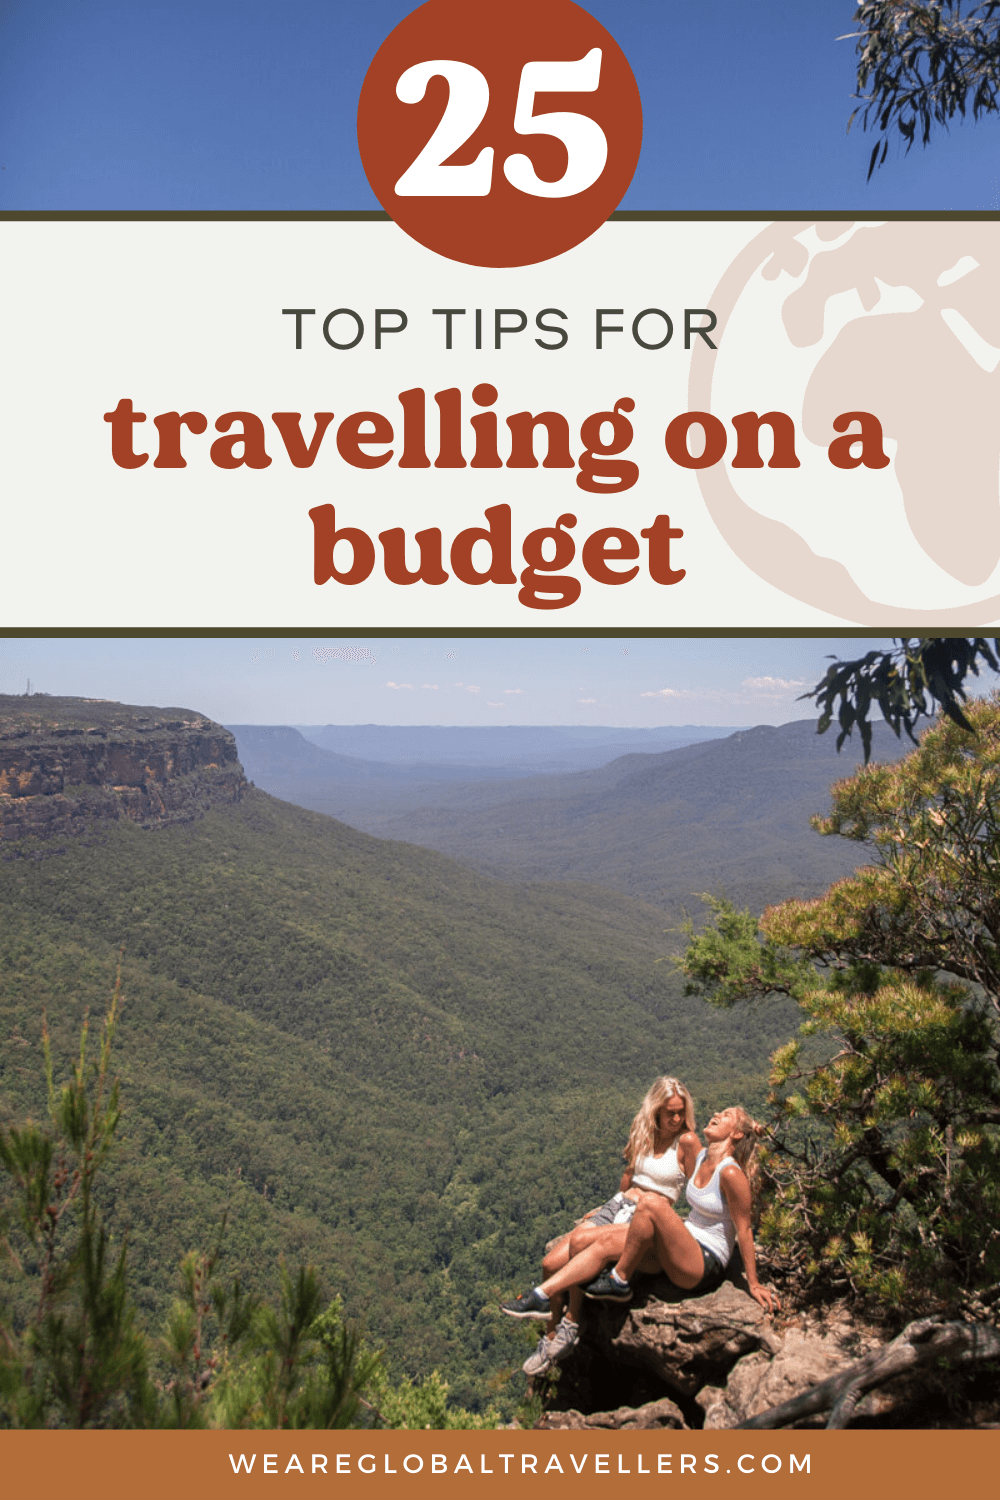 25 top tips for travelling on a budget